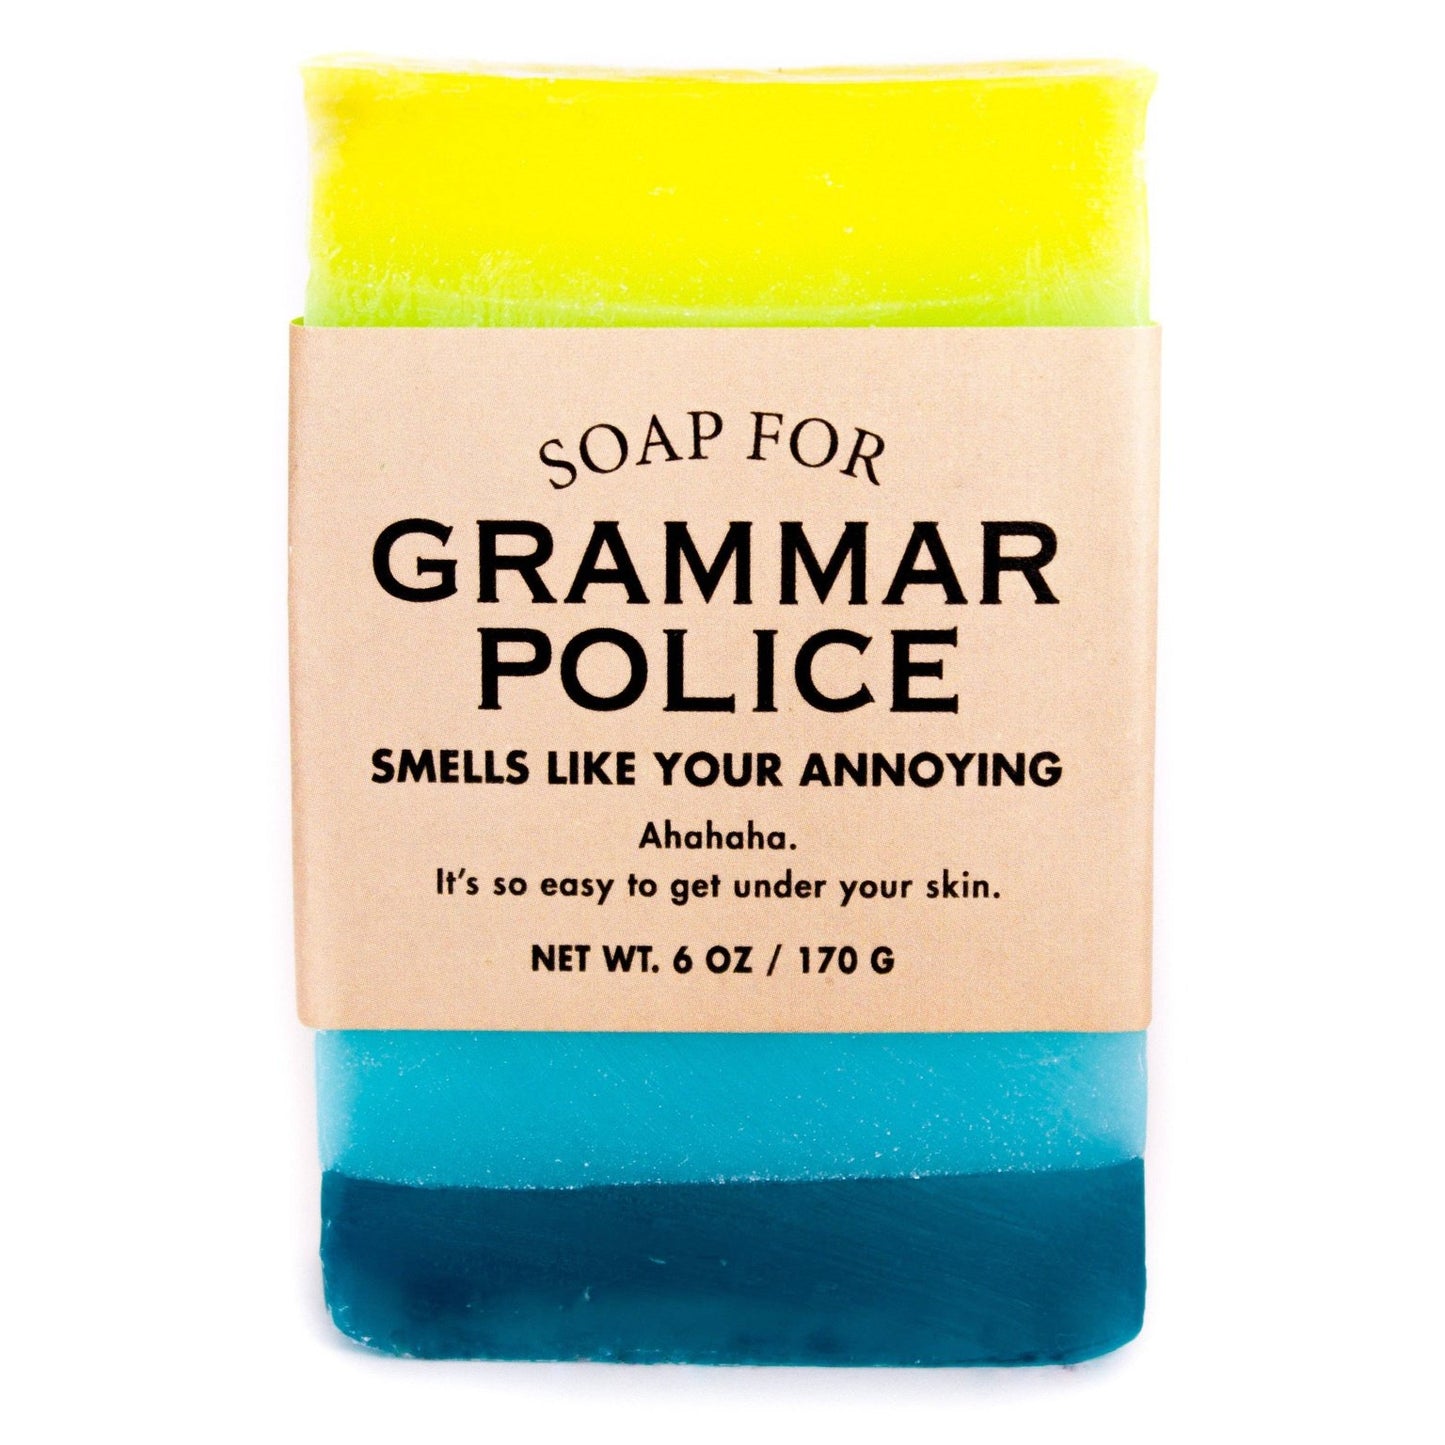 A Soap for Grammar Police | Funny Soap